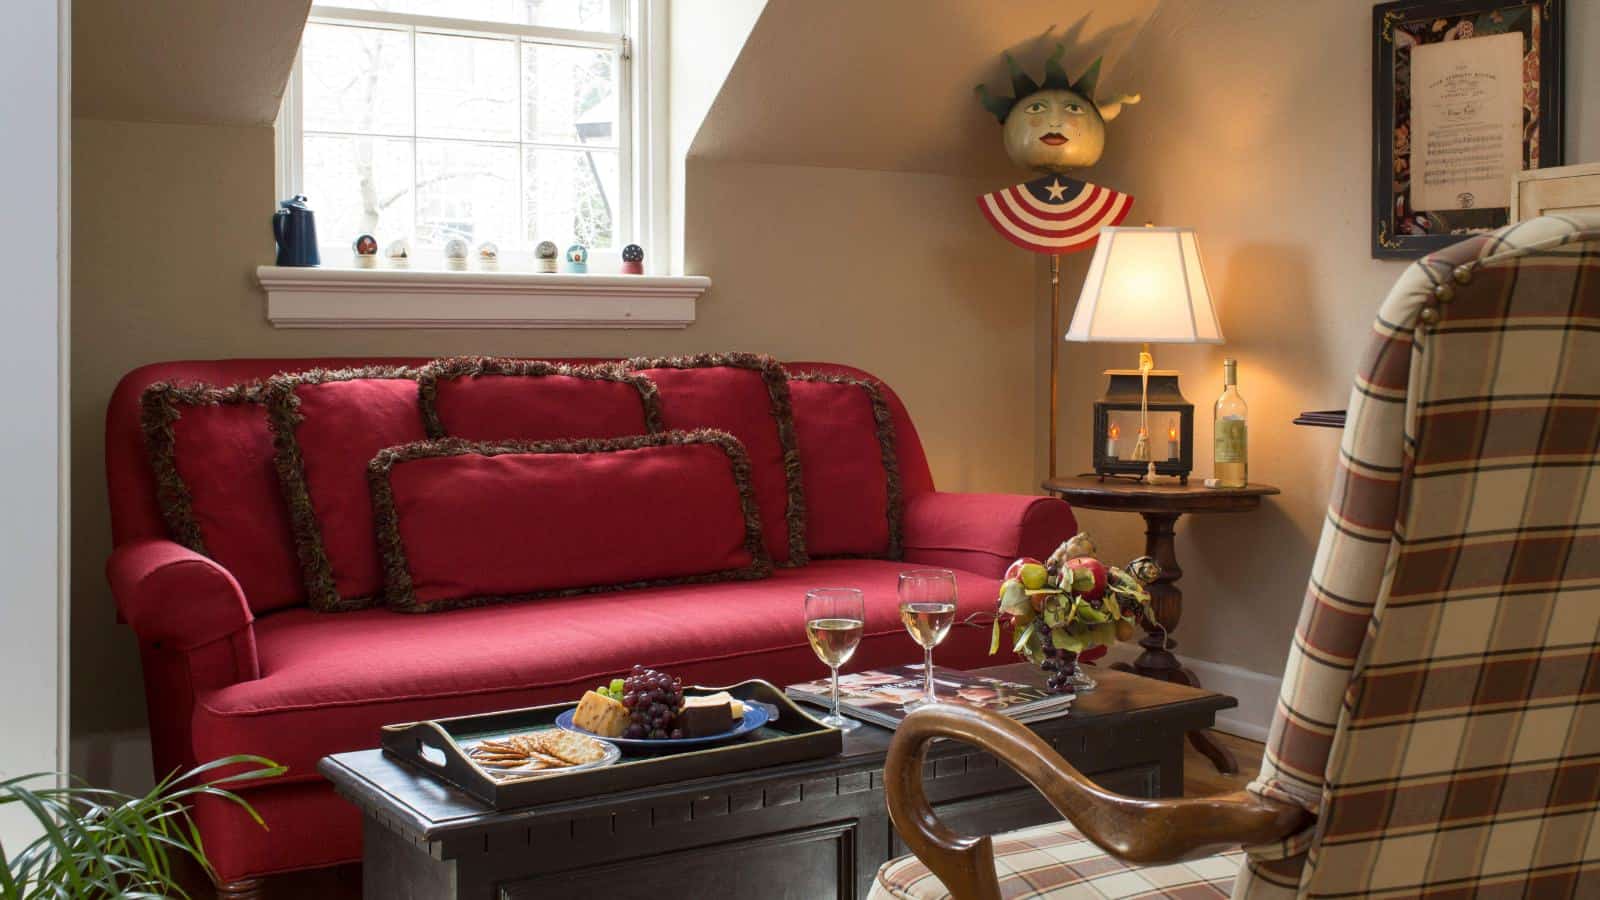 Sitting area with red upholstered sofa, dark wooden trunk as a table, and wooden tray on trunk with fruit, cheese, and crackers